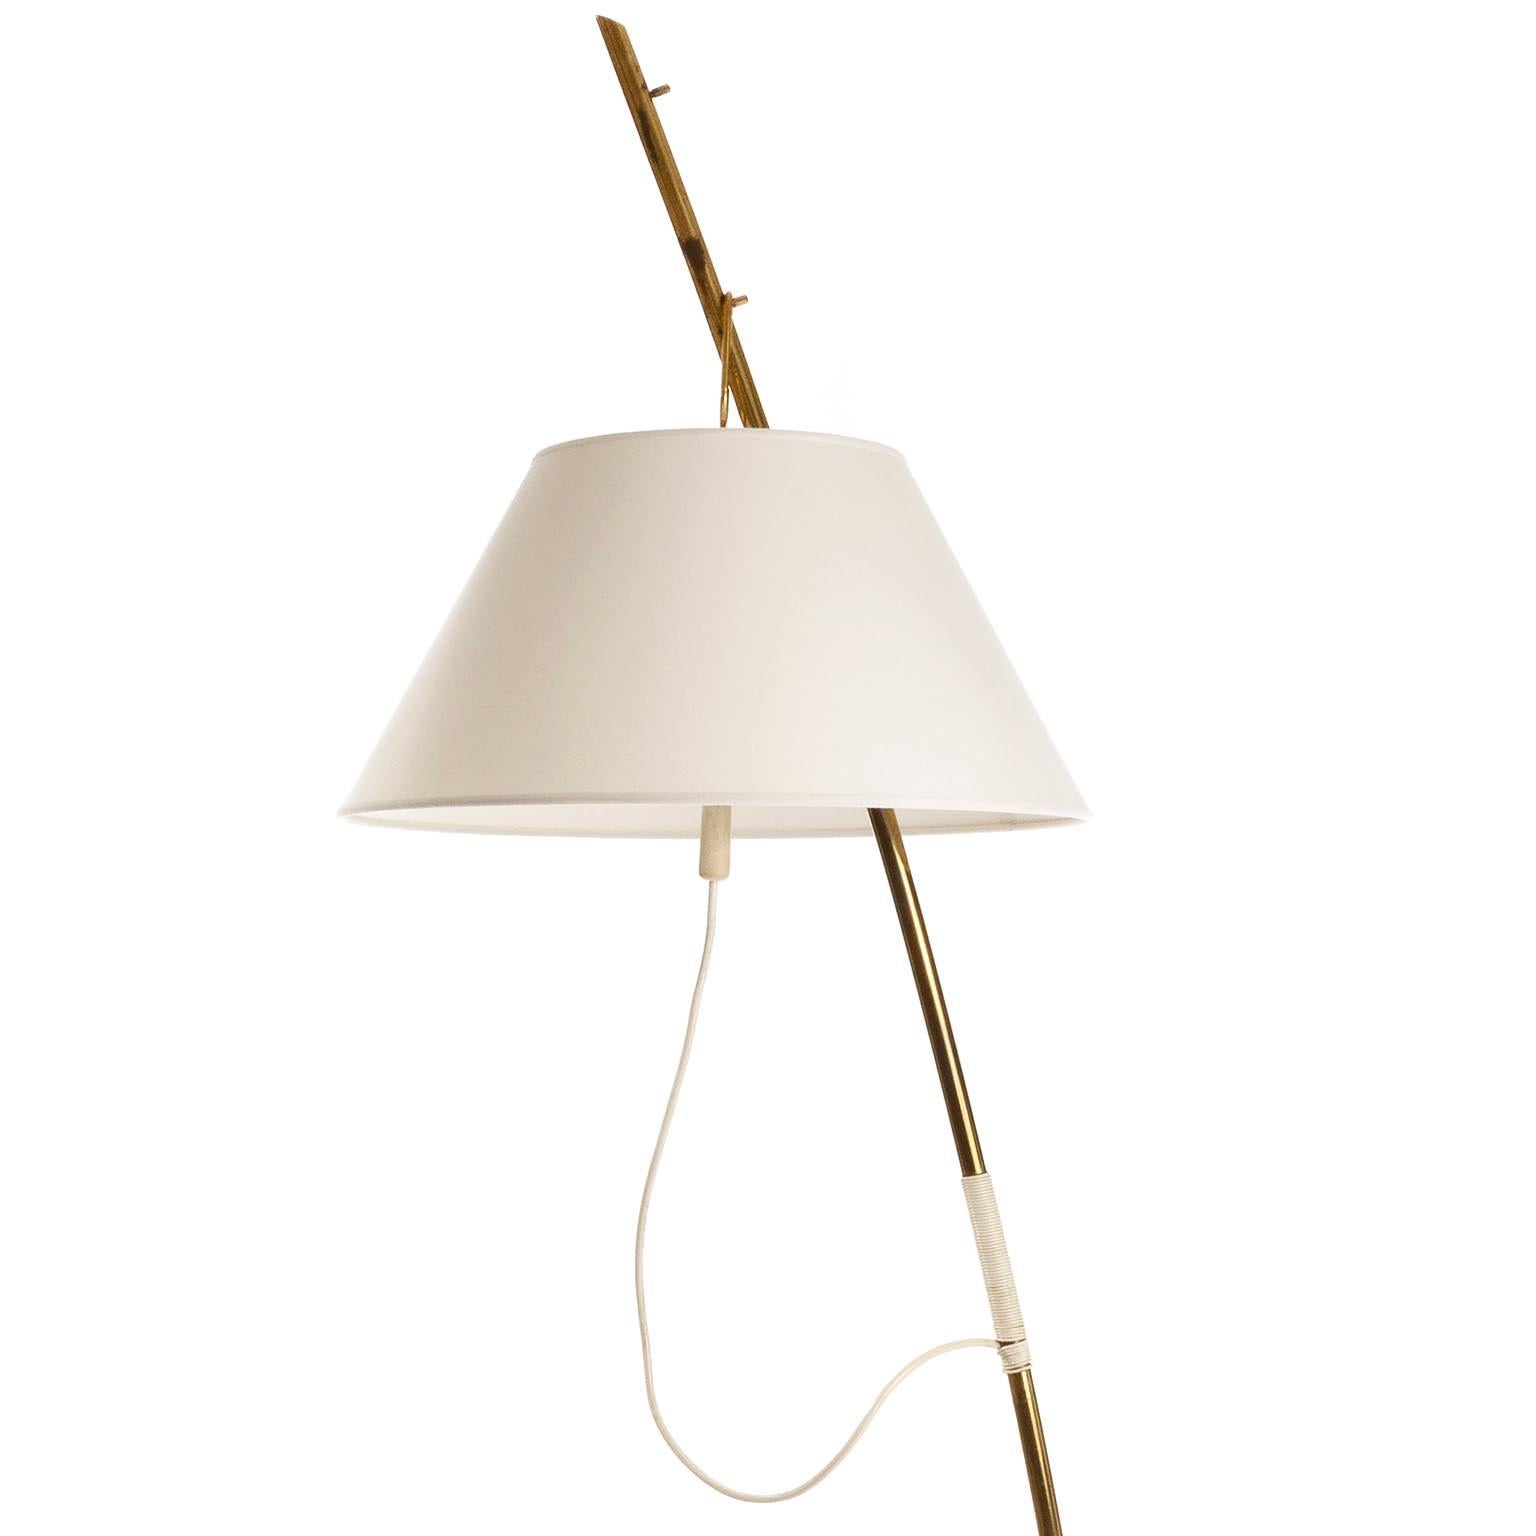 Mid-20th Century One of Two Height Adjustable Kalmar Brass Floor Lamps 'Cavador' No. 2098, 1960 For Sale